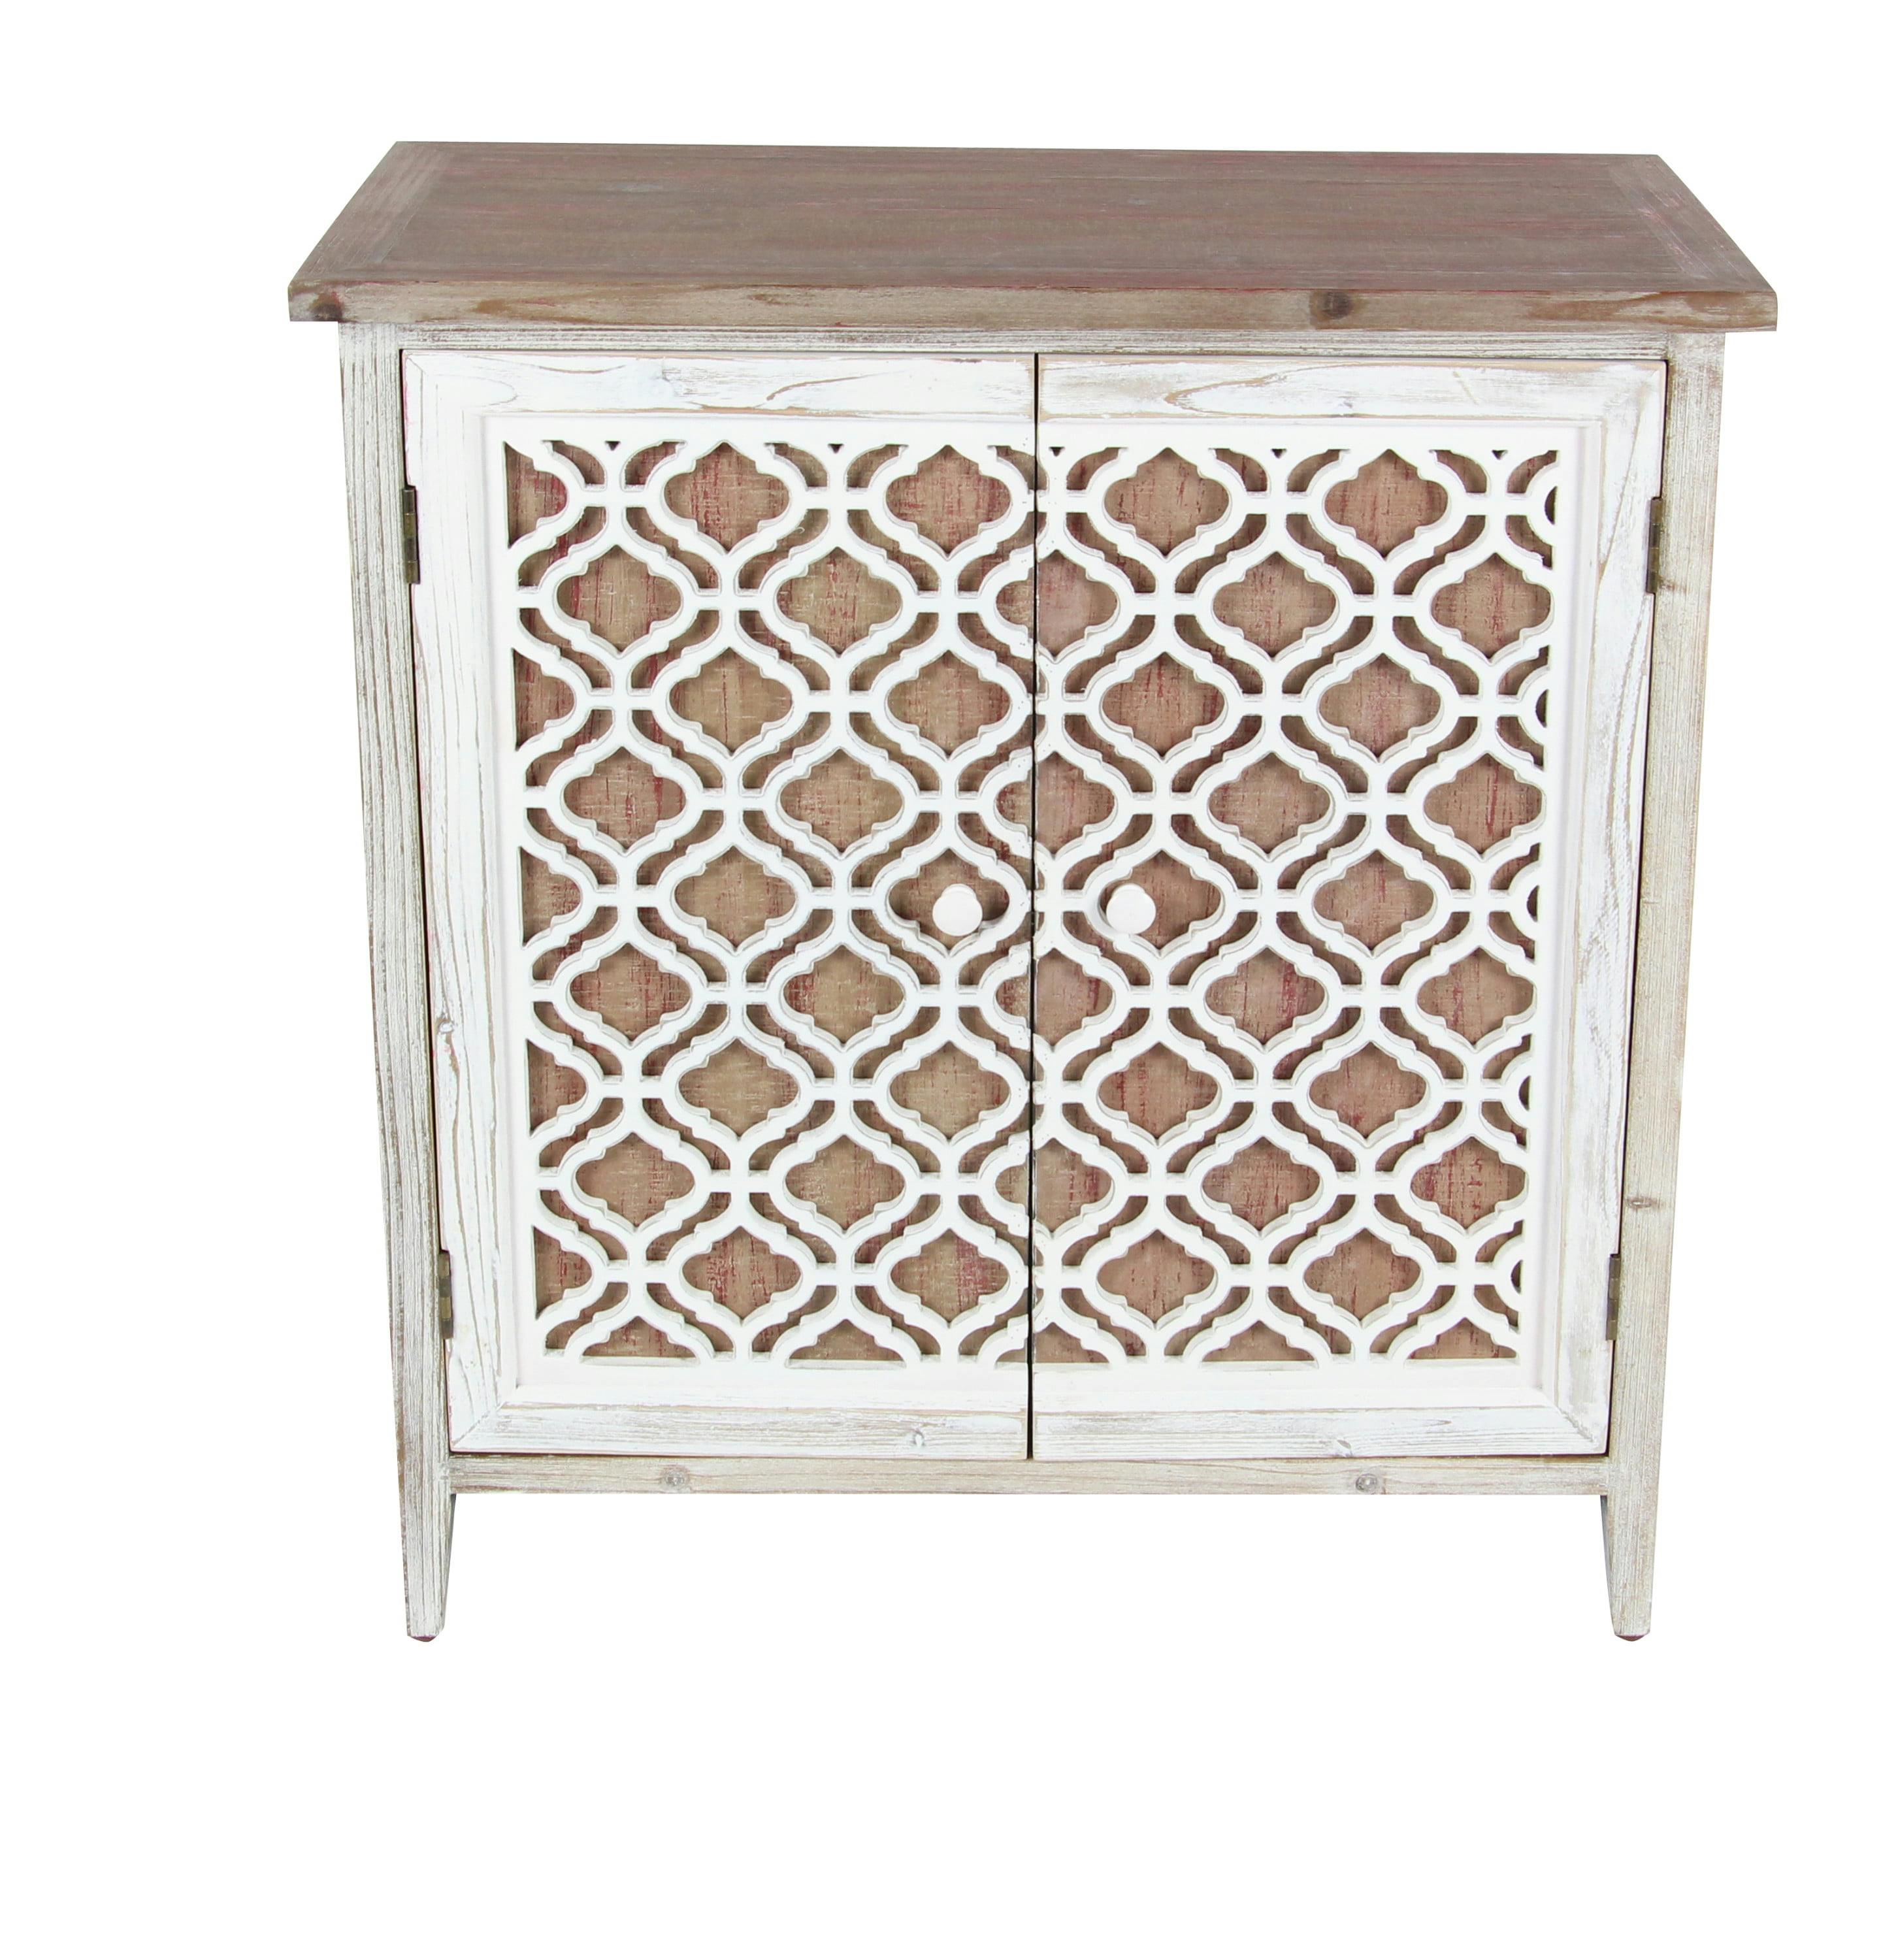 Rustic Brown Geometric Carved Wooden Cabinet - Freestanding